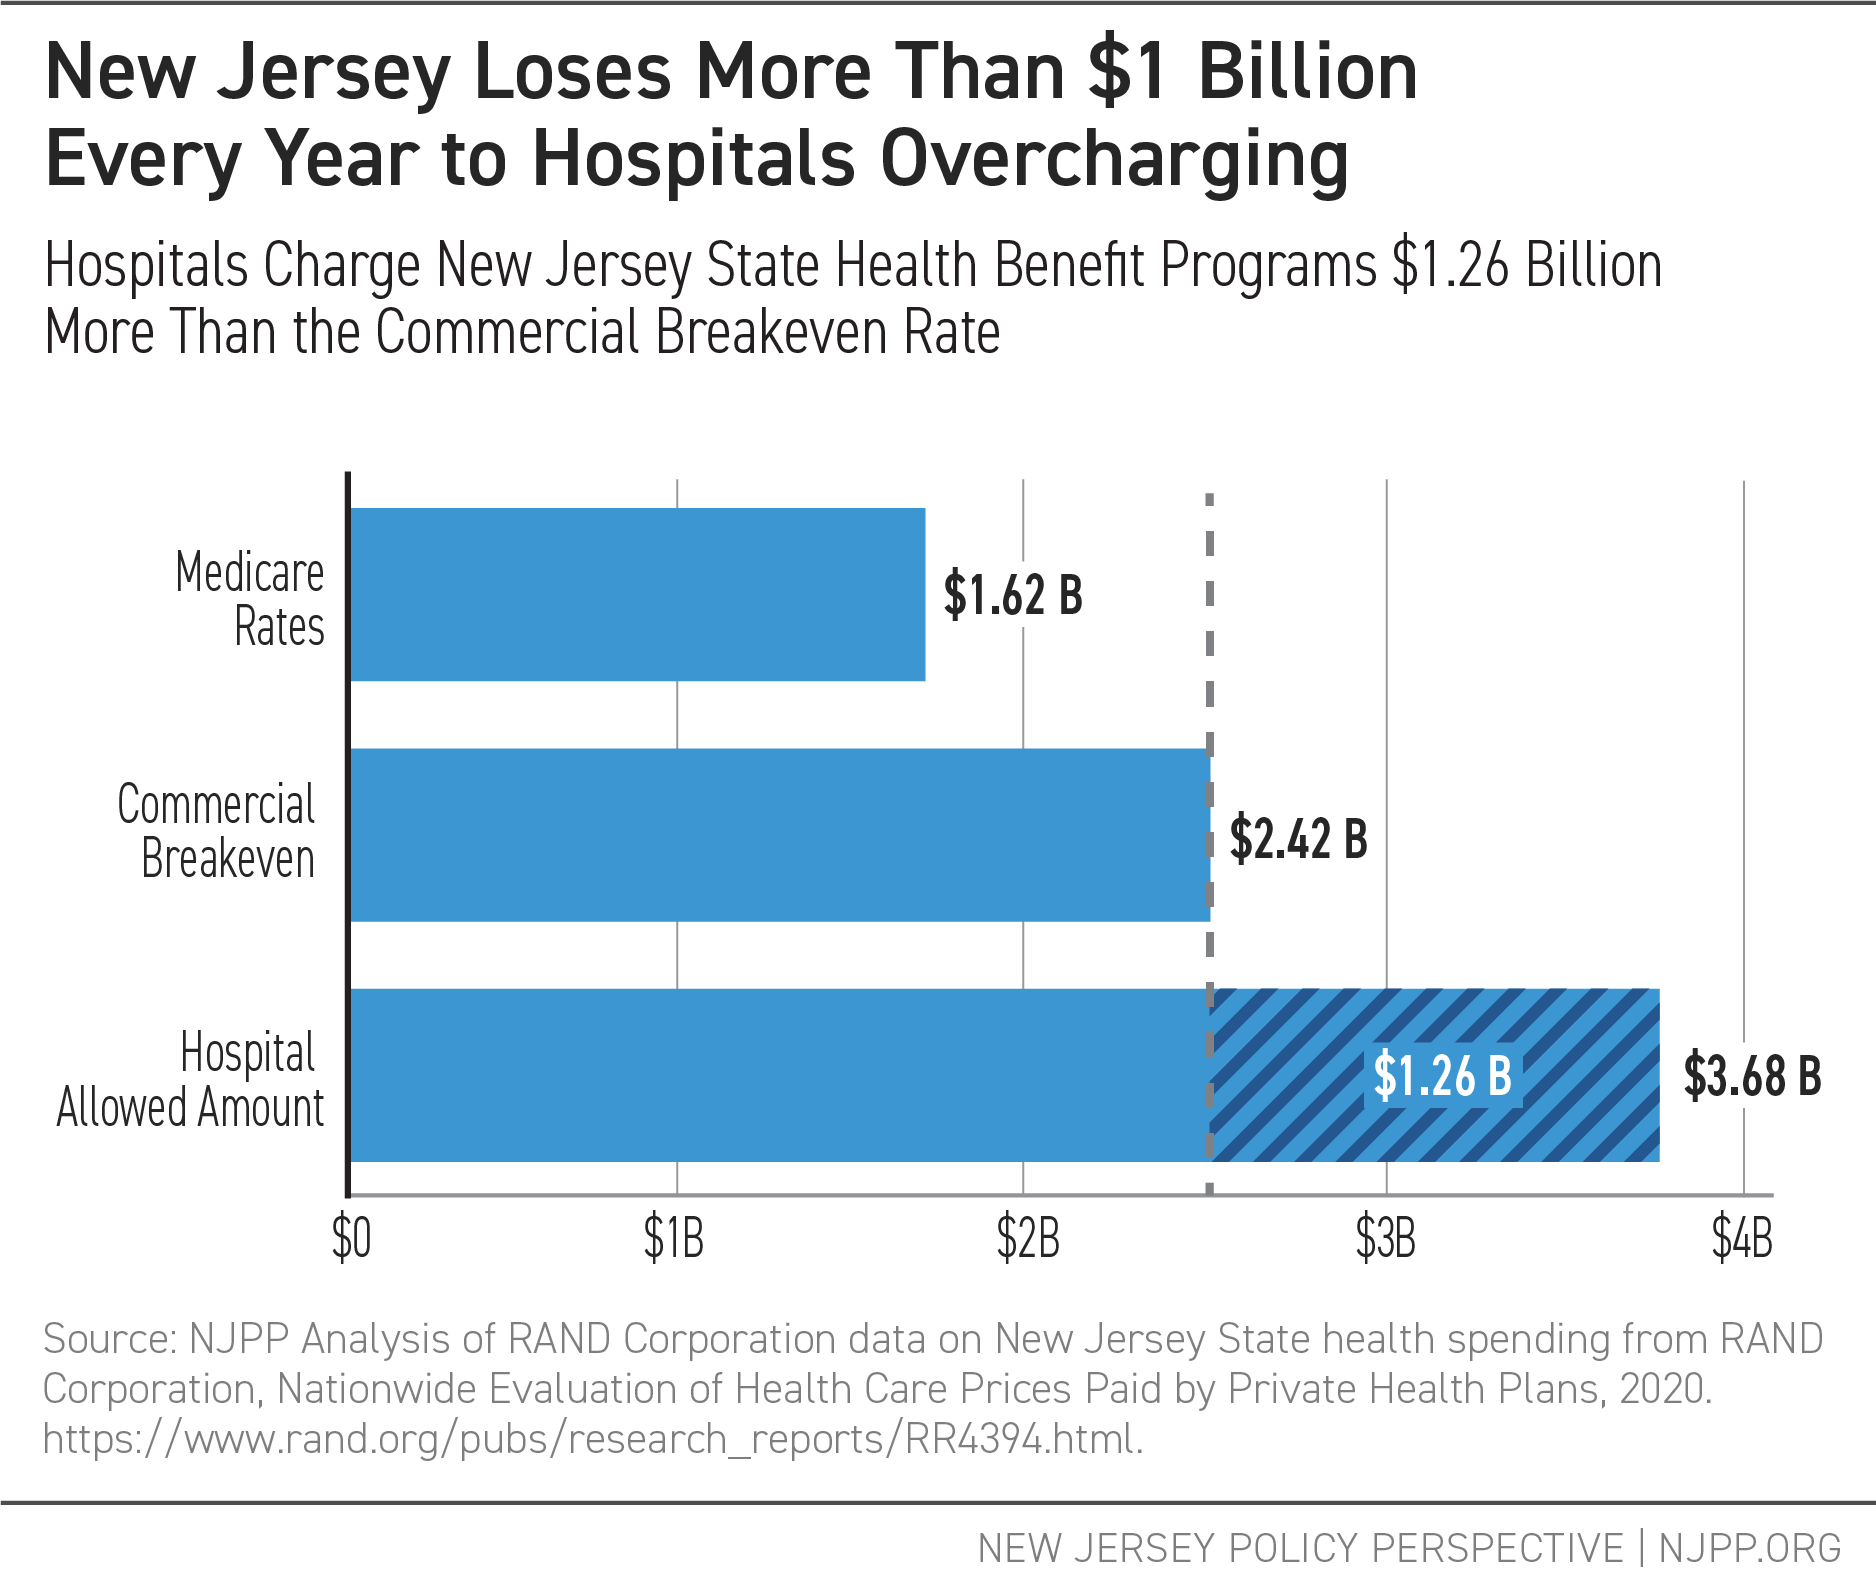 Bar chart showing costs for Medicare Rates, Commercial Breakeven and Hospital Allowed Amount; emphasizing the $1.26 billion difference between Commercial Breakeven and Hospital Allowed Amount